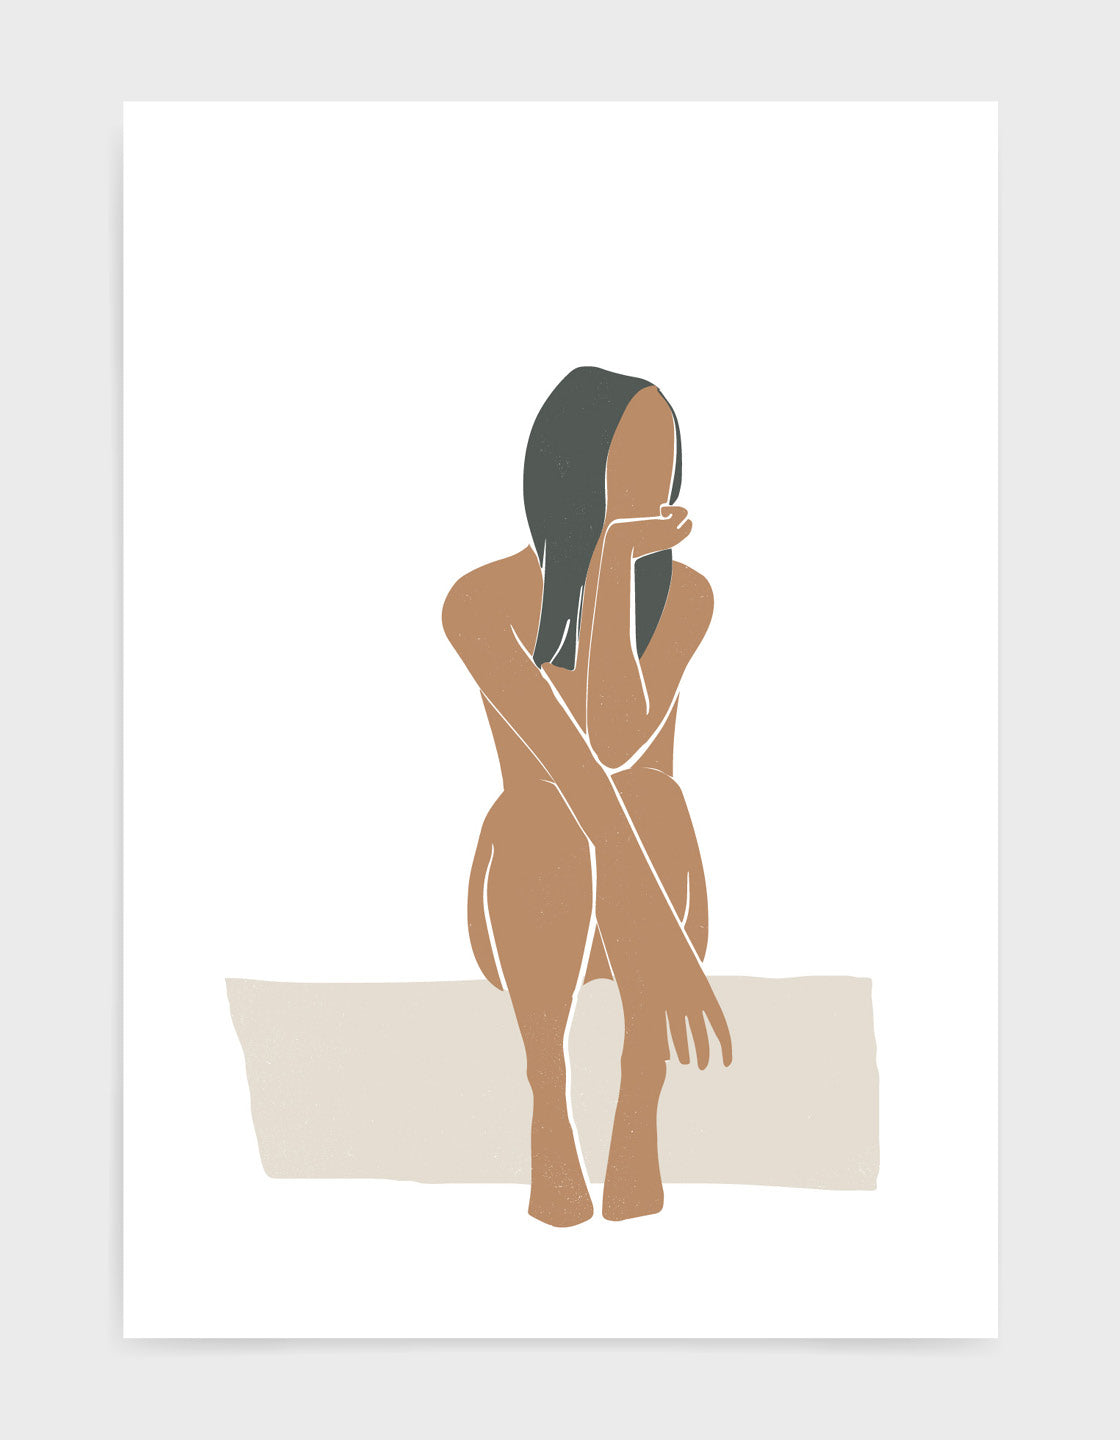 Minimal poster print depicting a nude woman with long dark hair sitting with legs up and arms on her knees looking off to one side